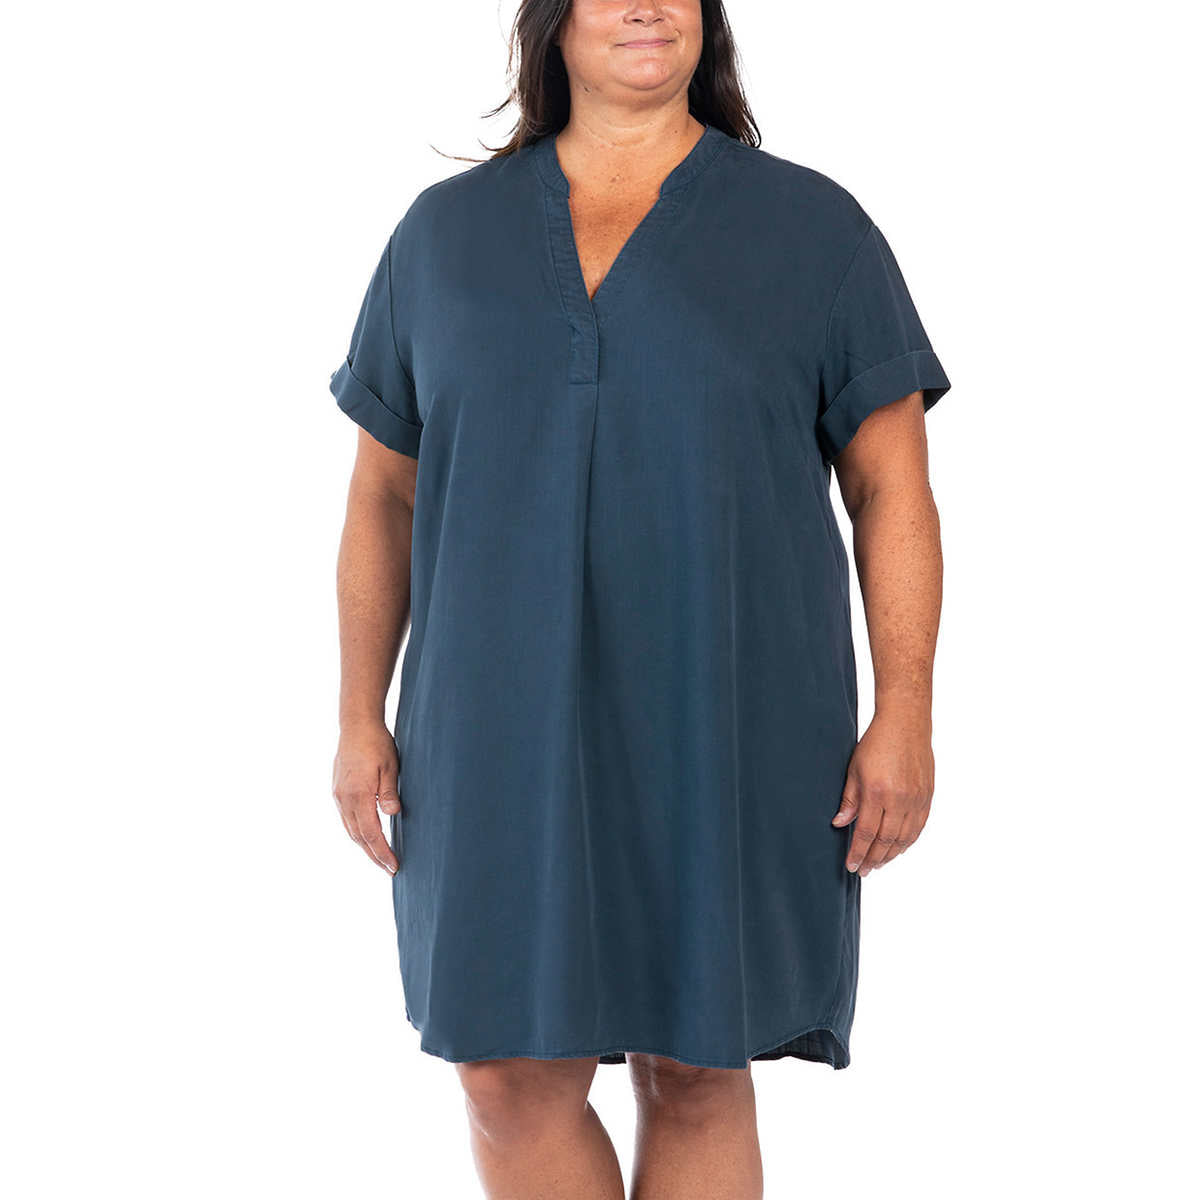 Hilary Radley Dresses for Women - GTM Discount General Stores